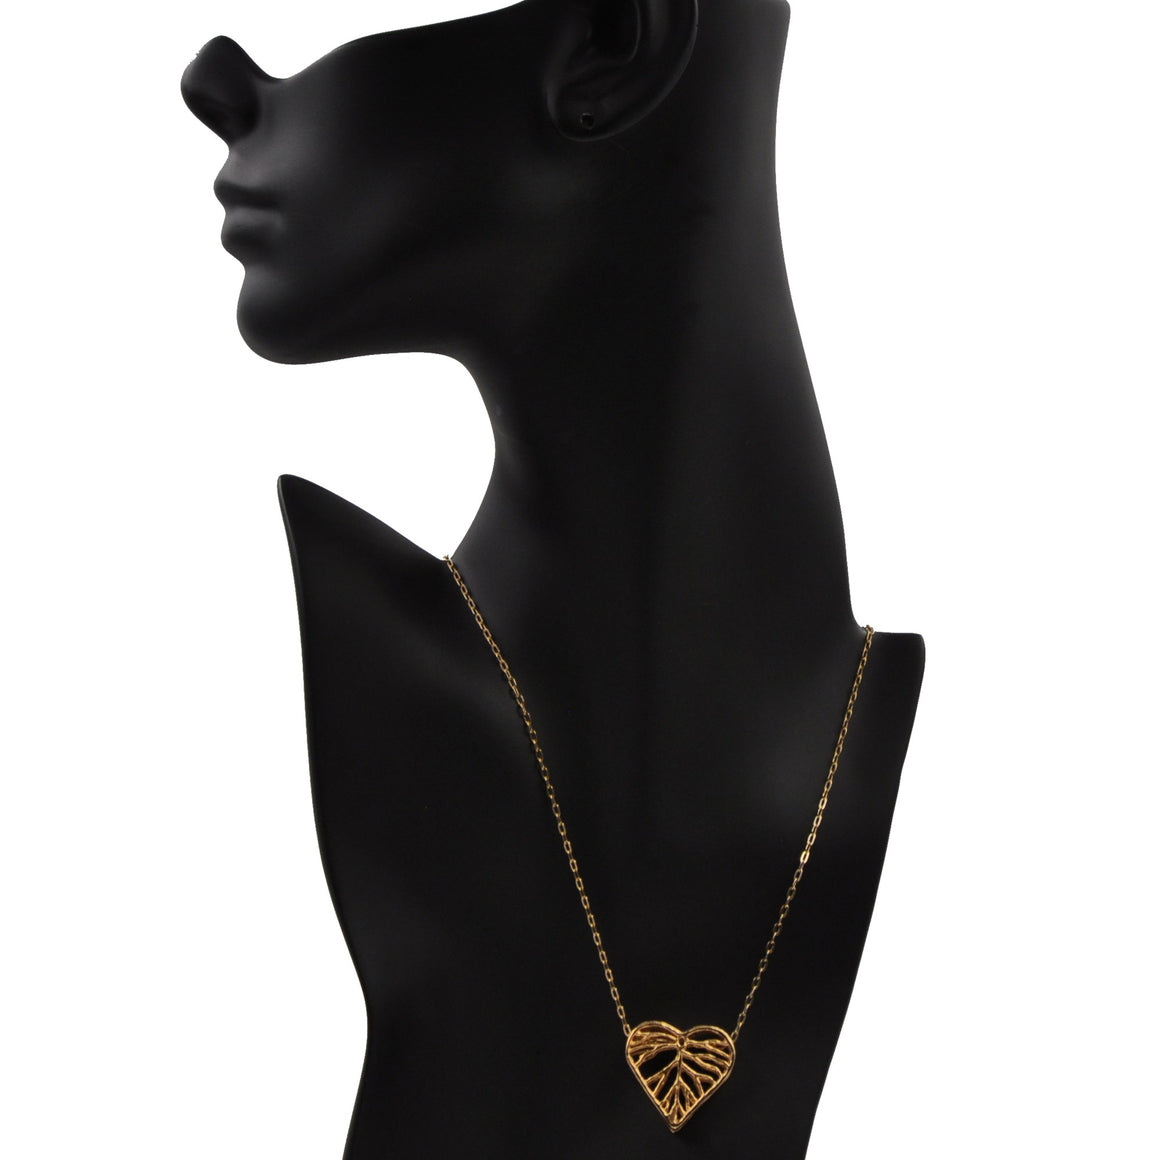 Heart Leaf Dimensional Necklace (Small) - 24K Gold Plated